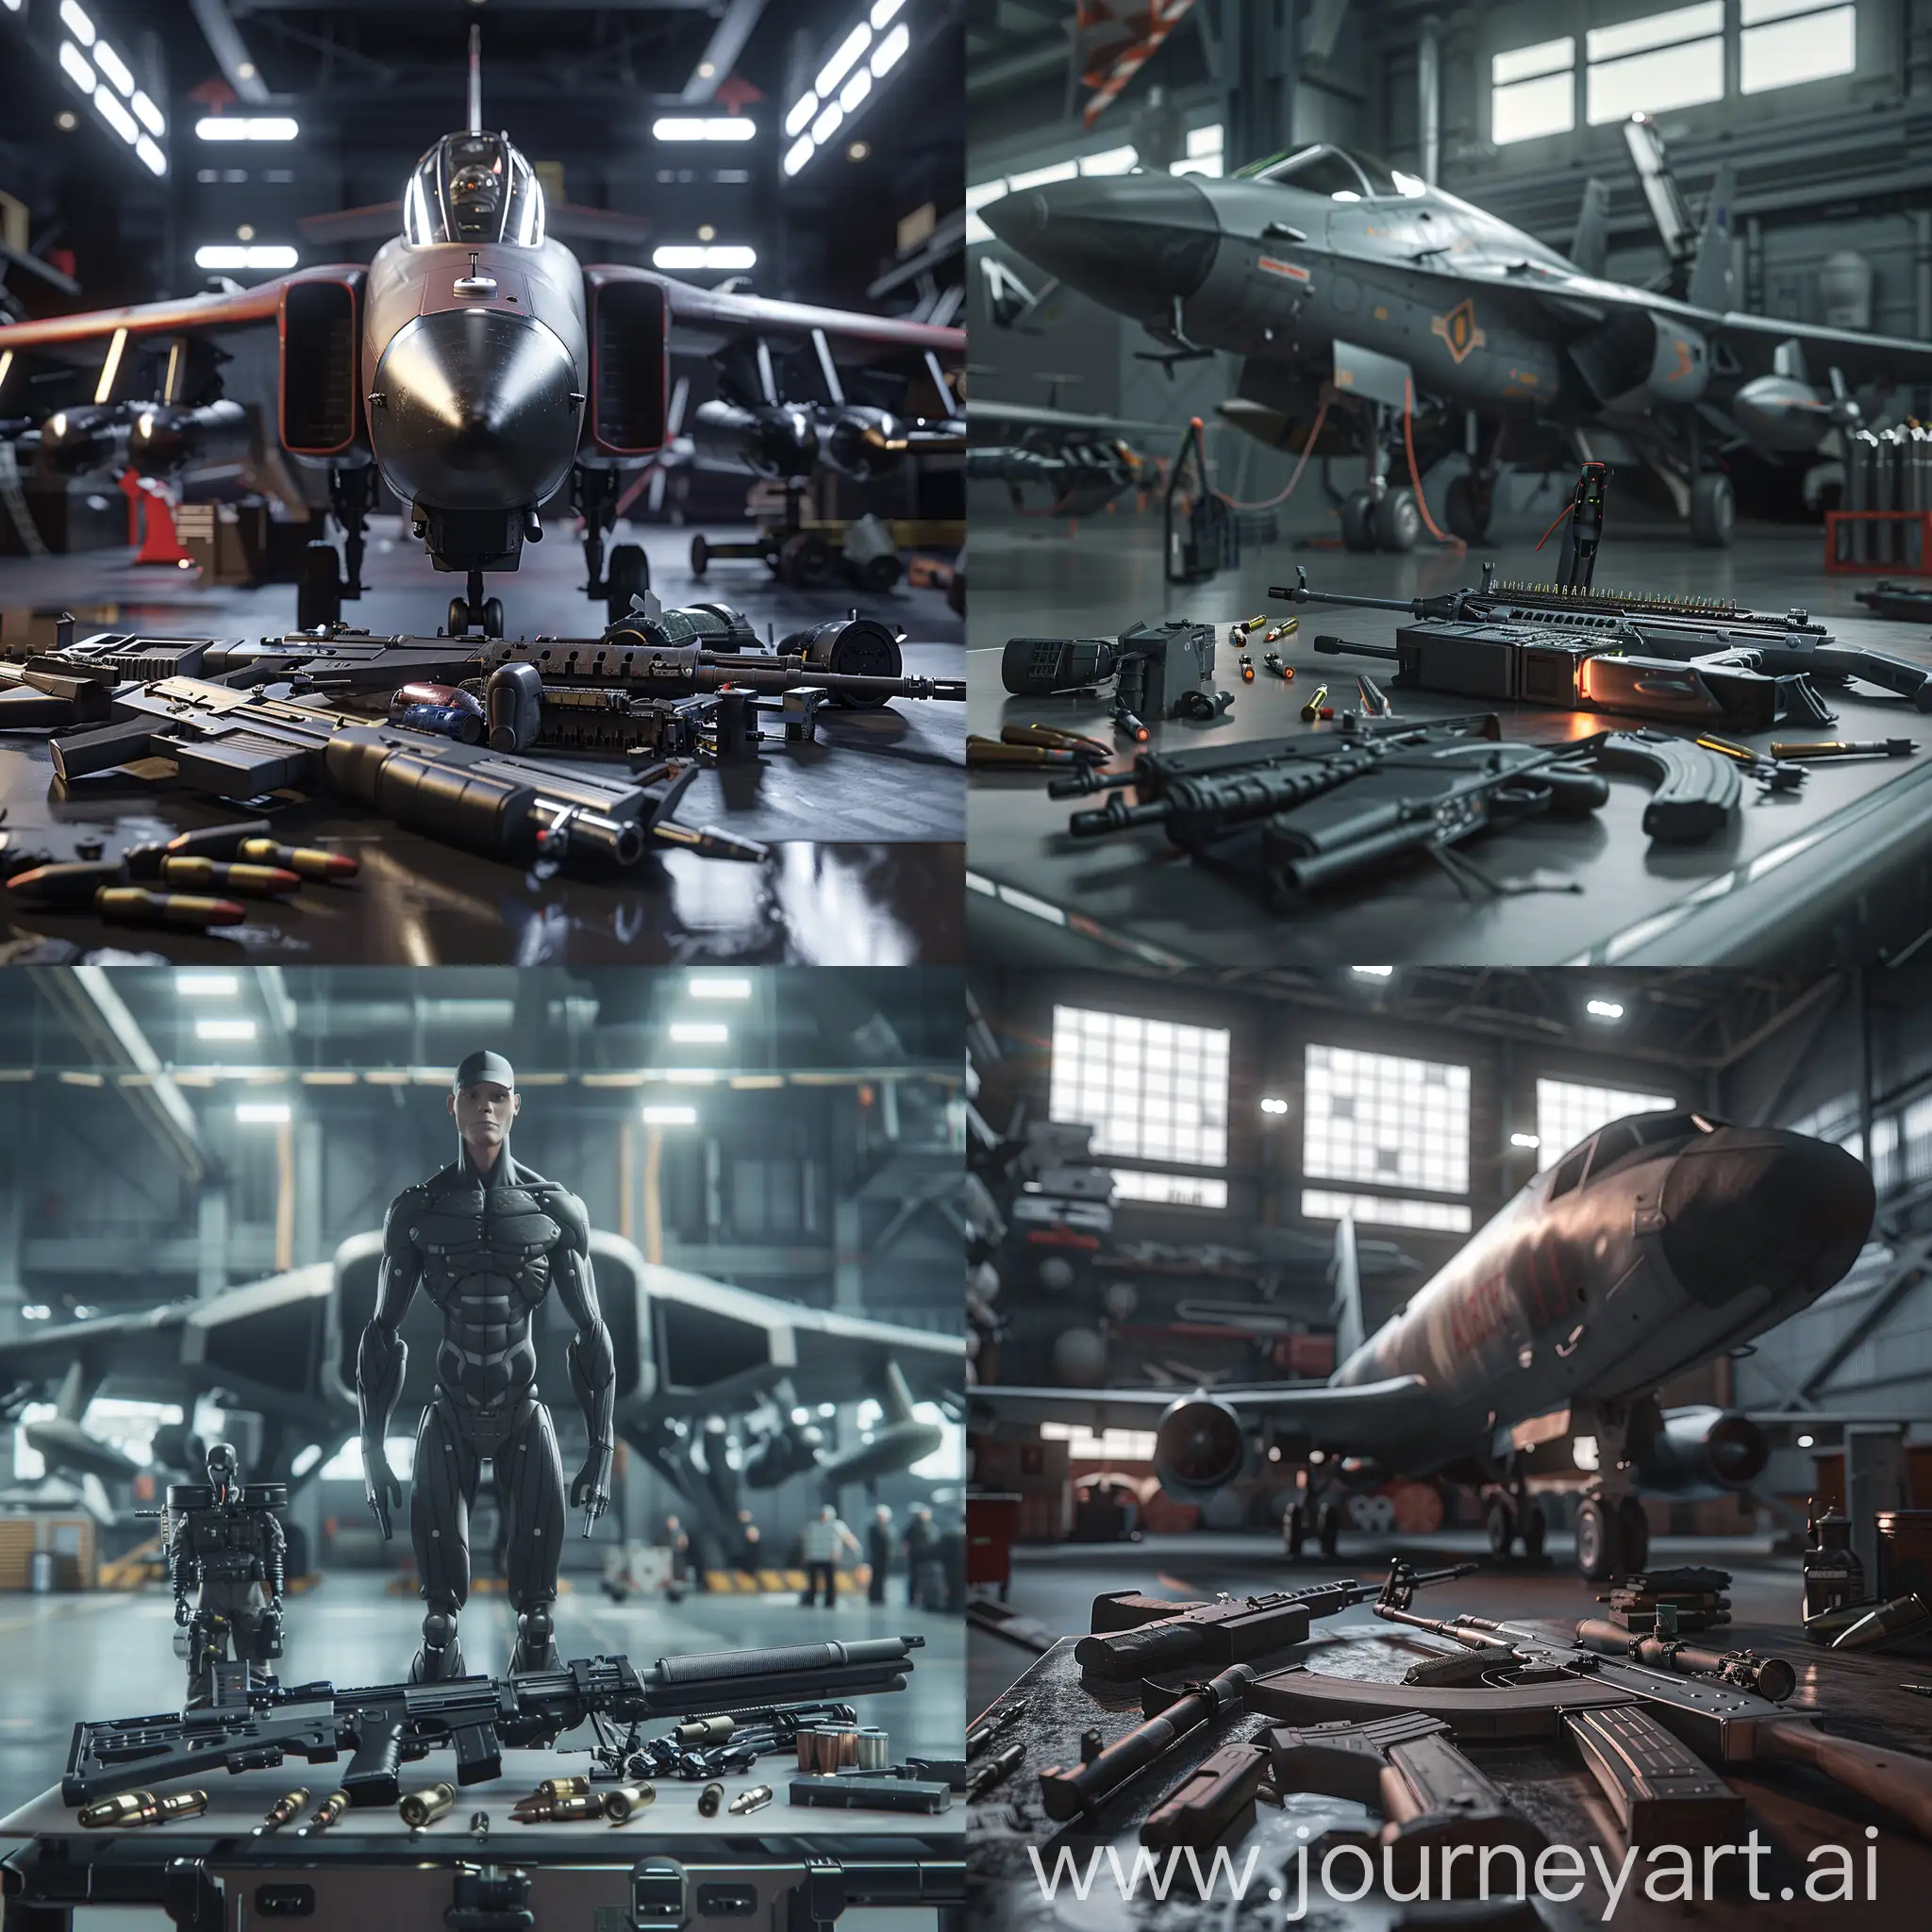 Weapons-Display-in-Hangar-Realistic-Scene-with-High-Detail